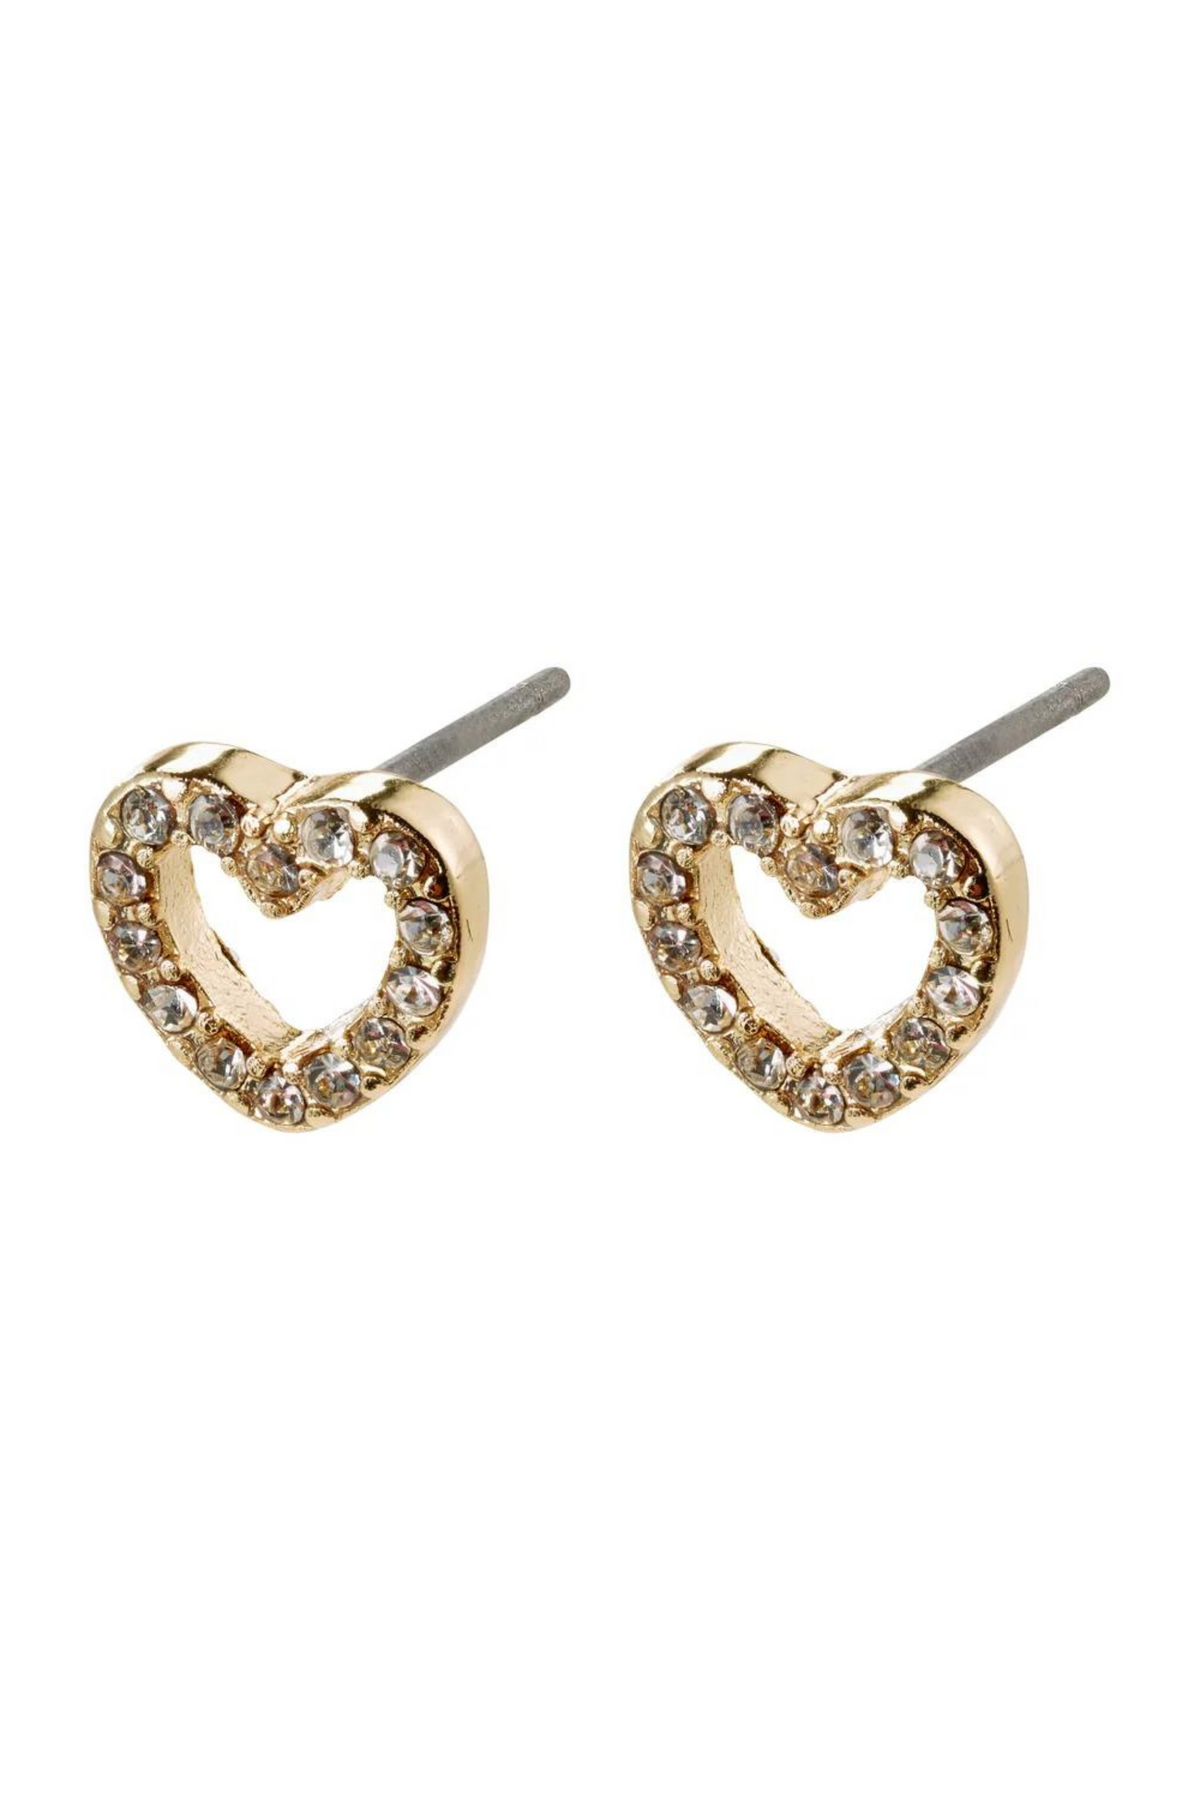 EDIE GOLD PLATED HEART CRYSTAL EARRINS-GD